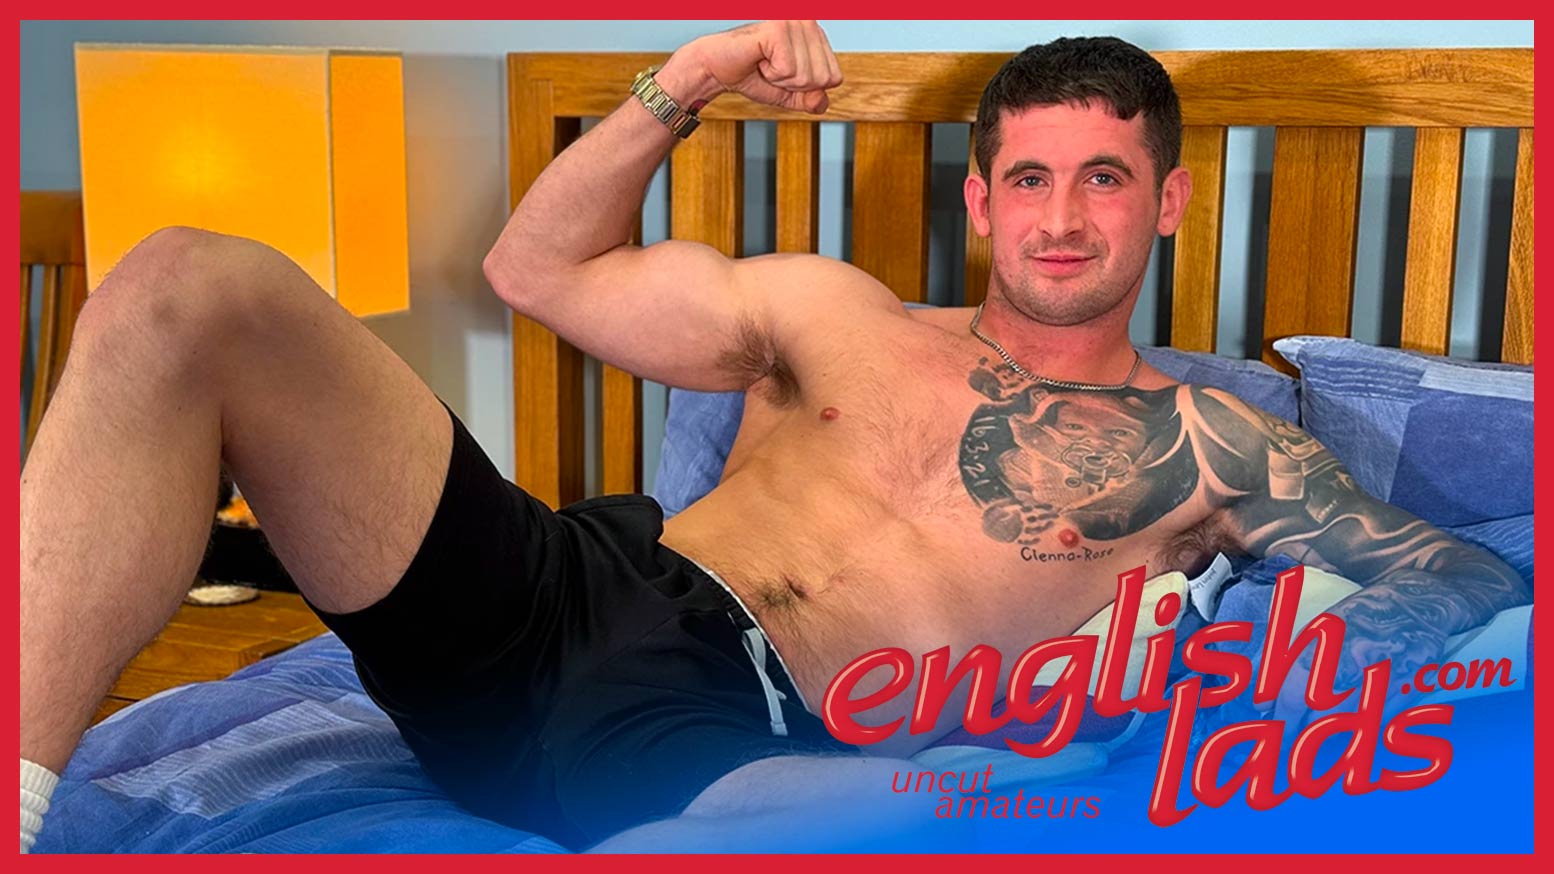 Young Straight Gym Lad Flaunts Muscles and Enjoys First Man-on-Man Wank on English Lads